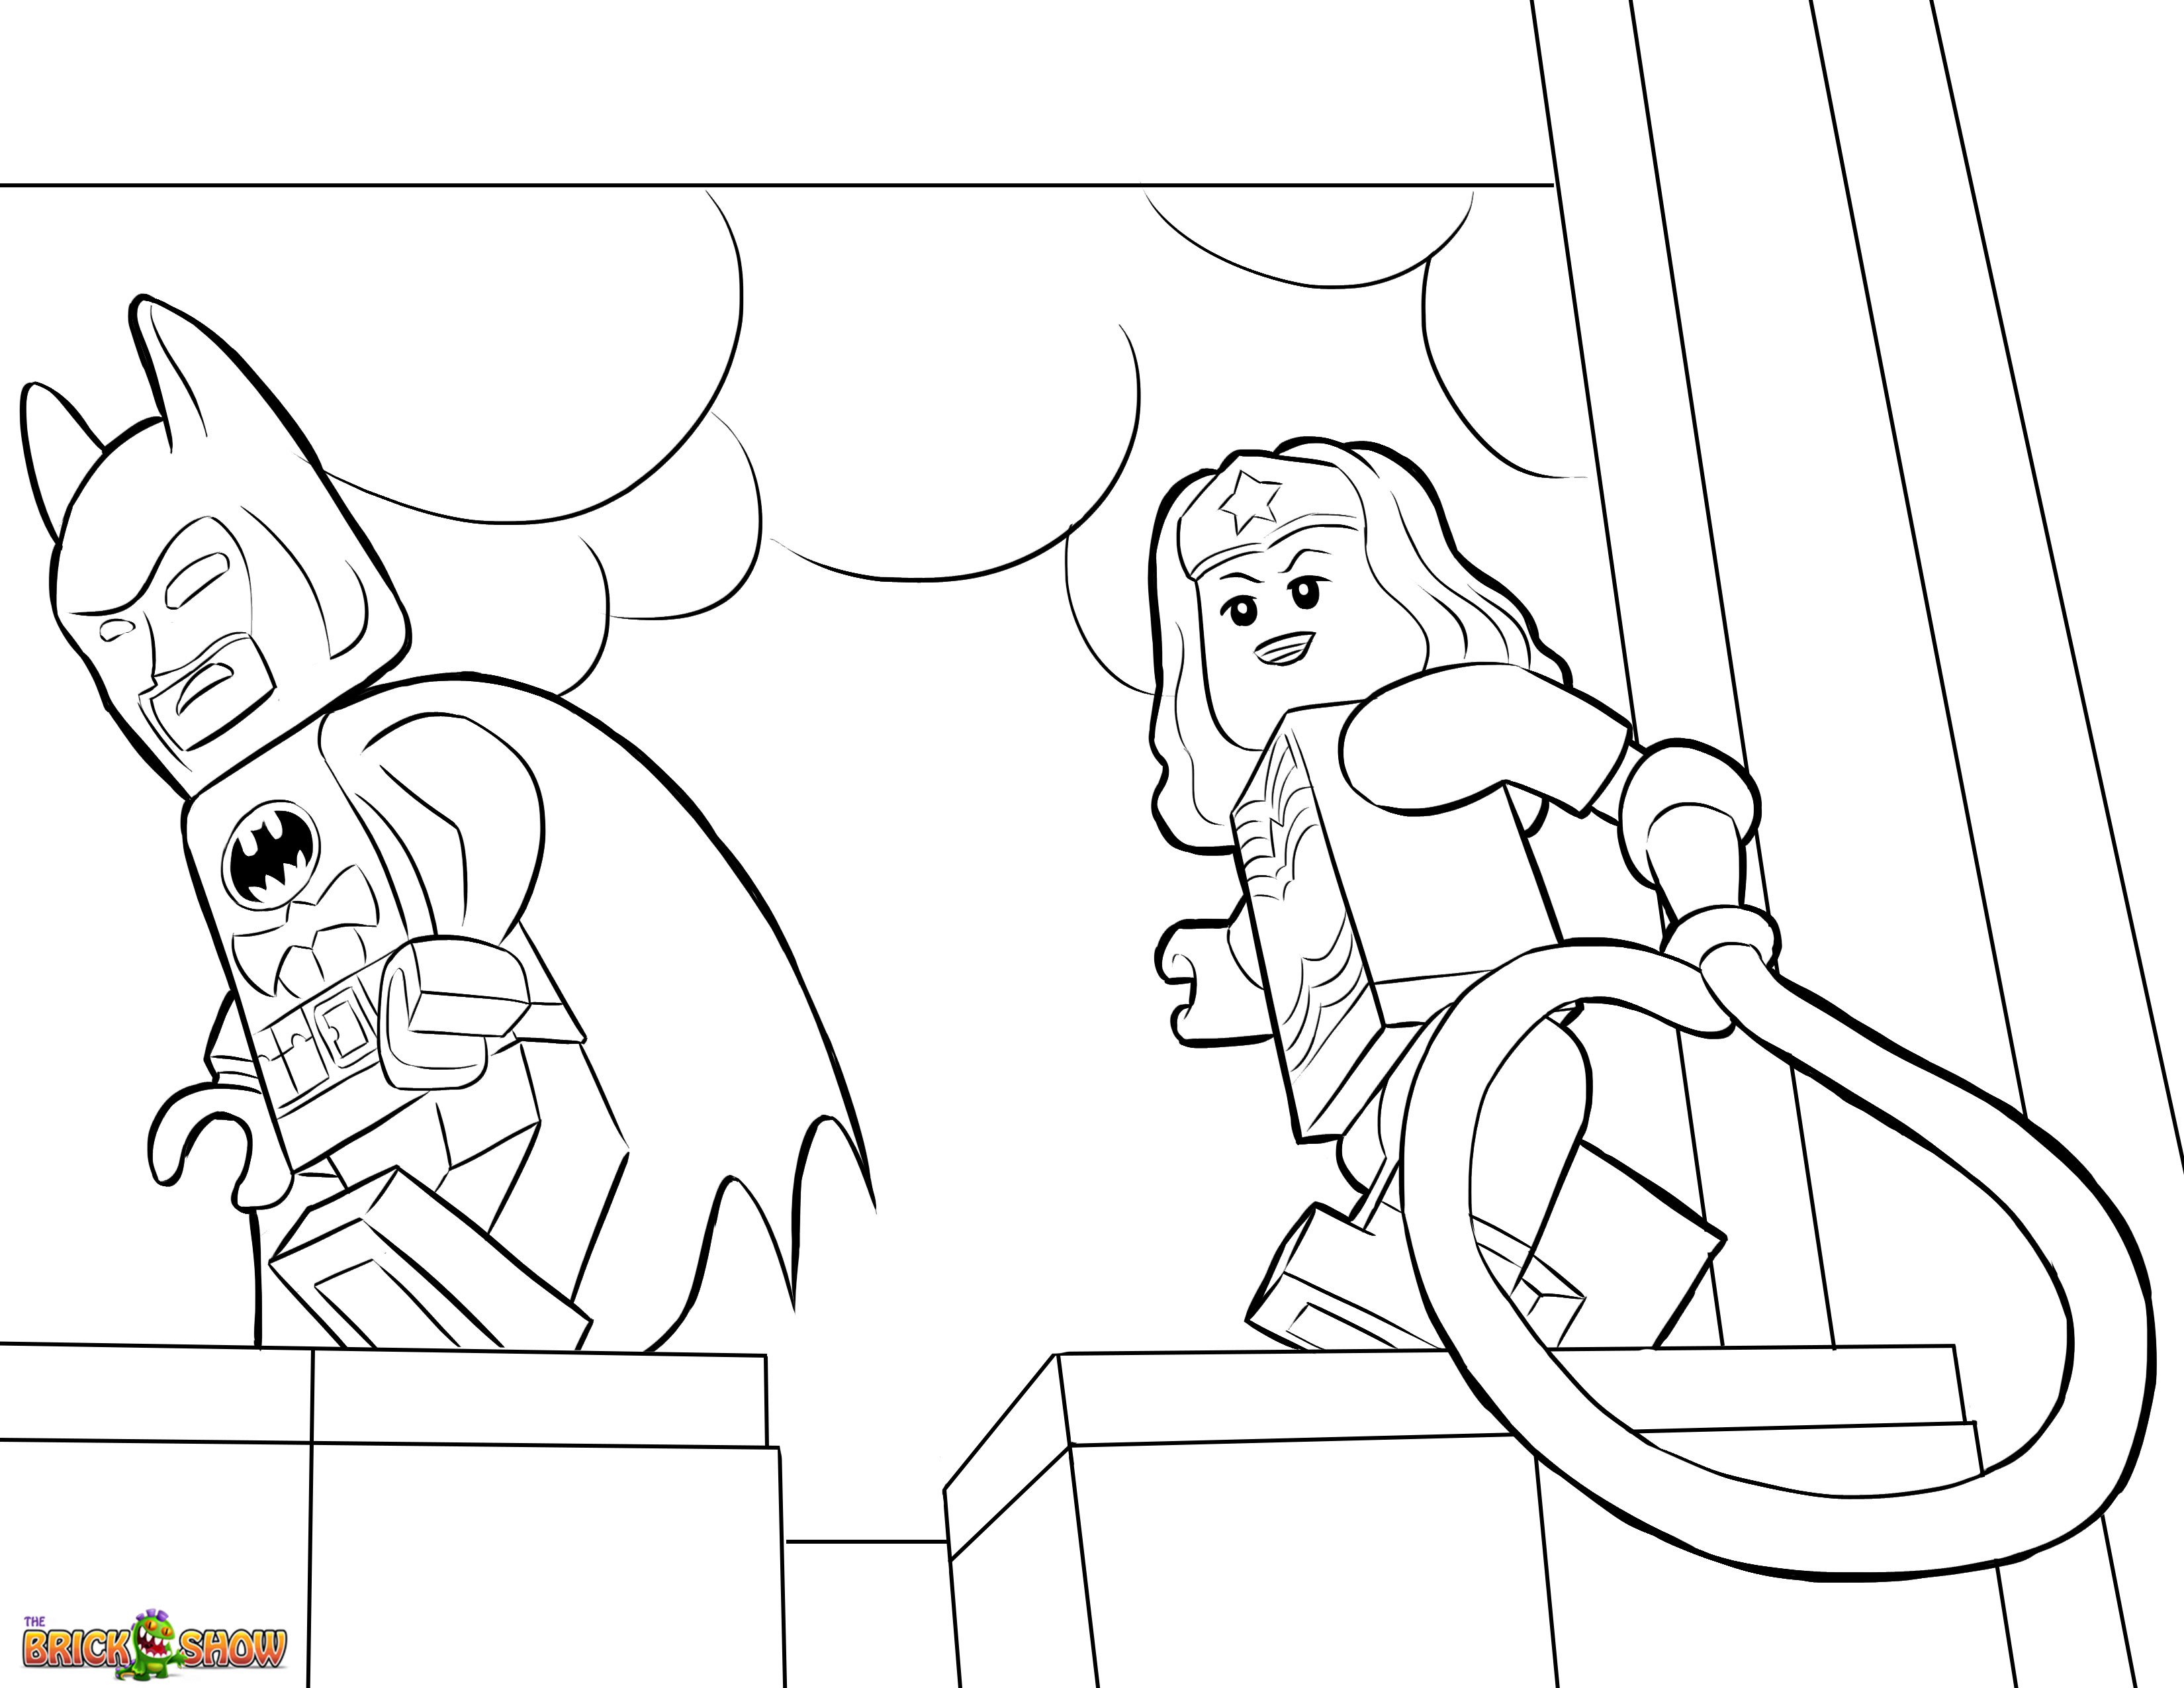 Lego Superman Printable Coloring Pages. Superman Coloring Page